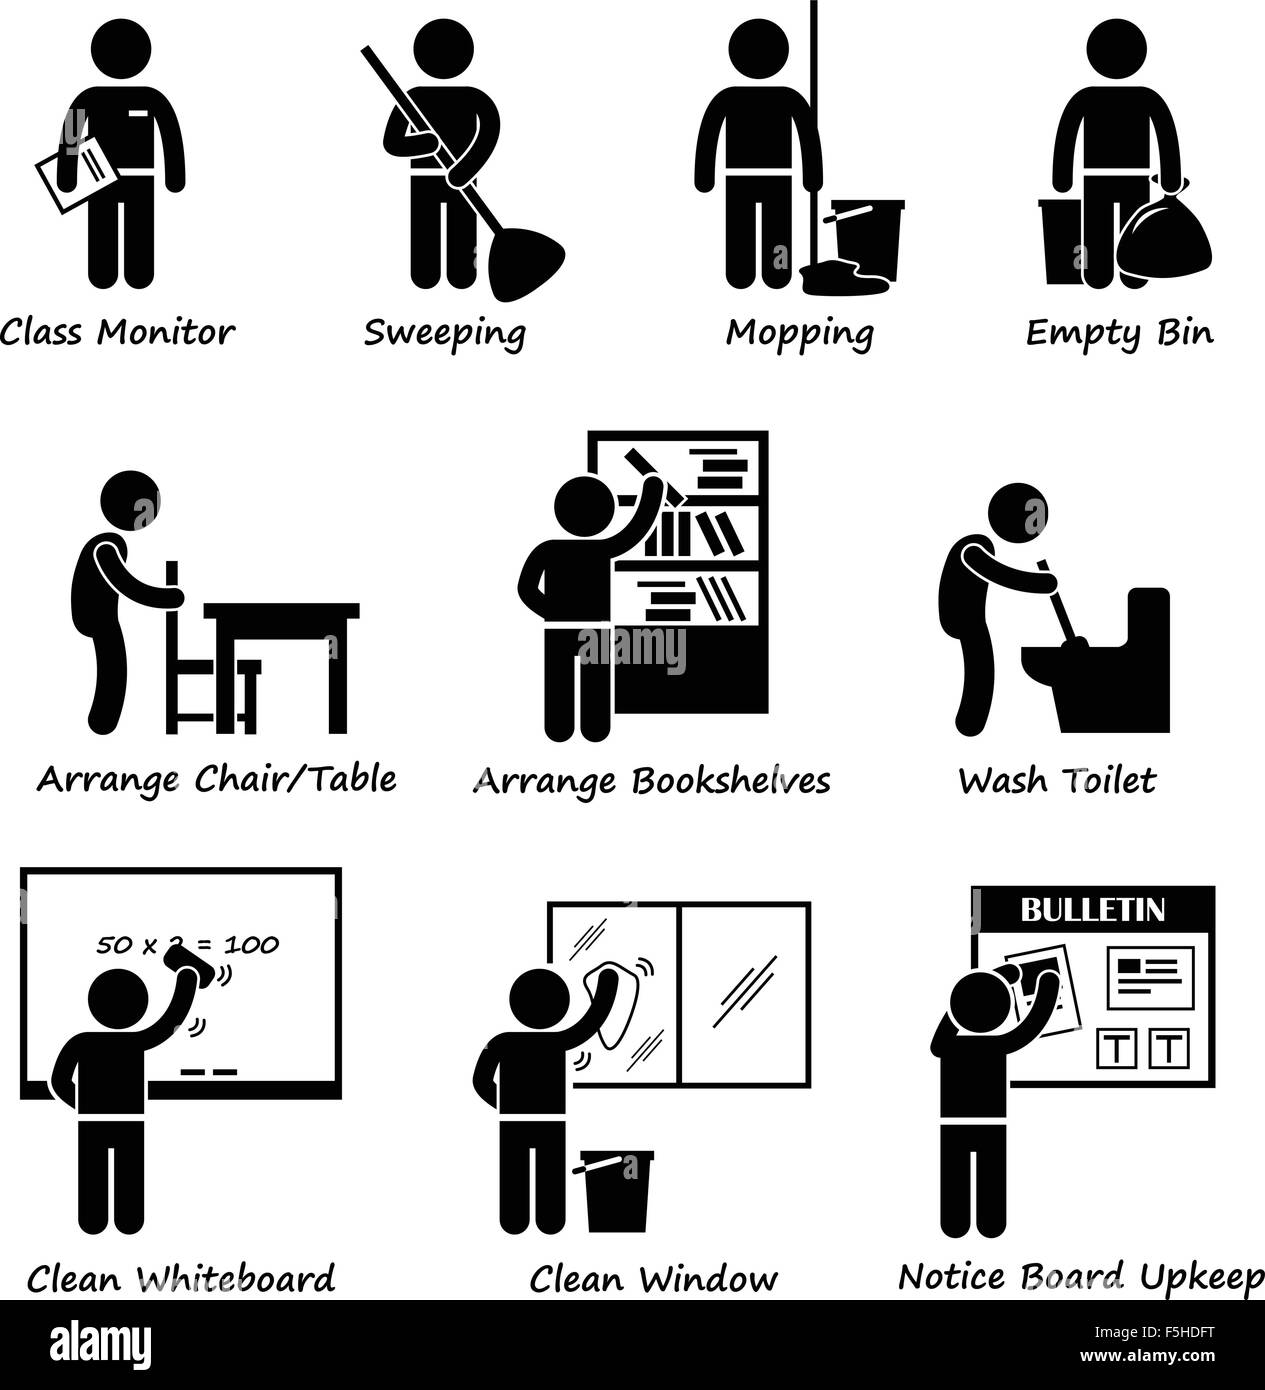 Classroom Student Duty Roster Stick Figure Pictogram Icon Clipart